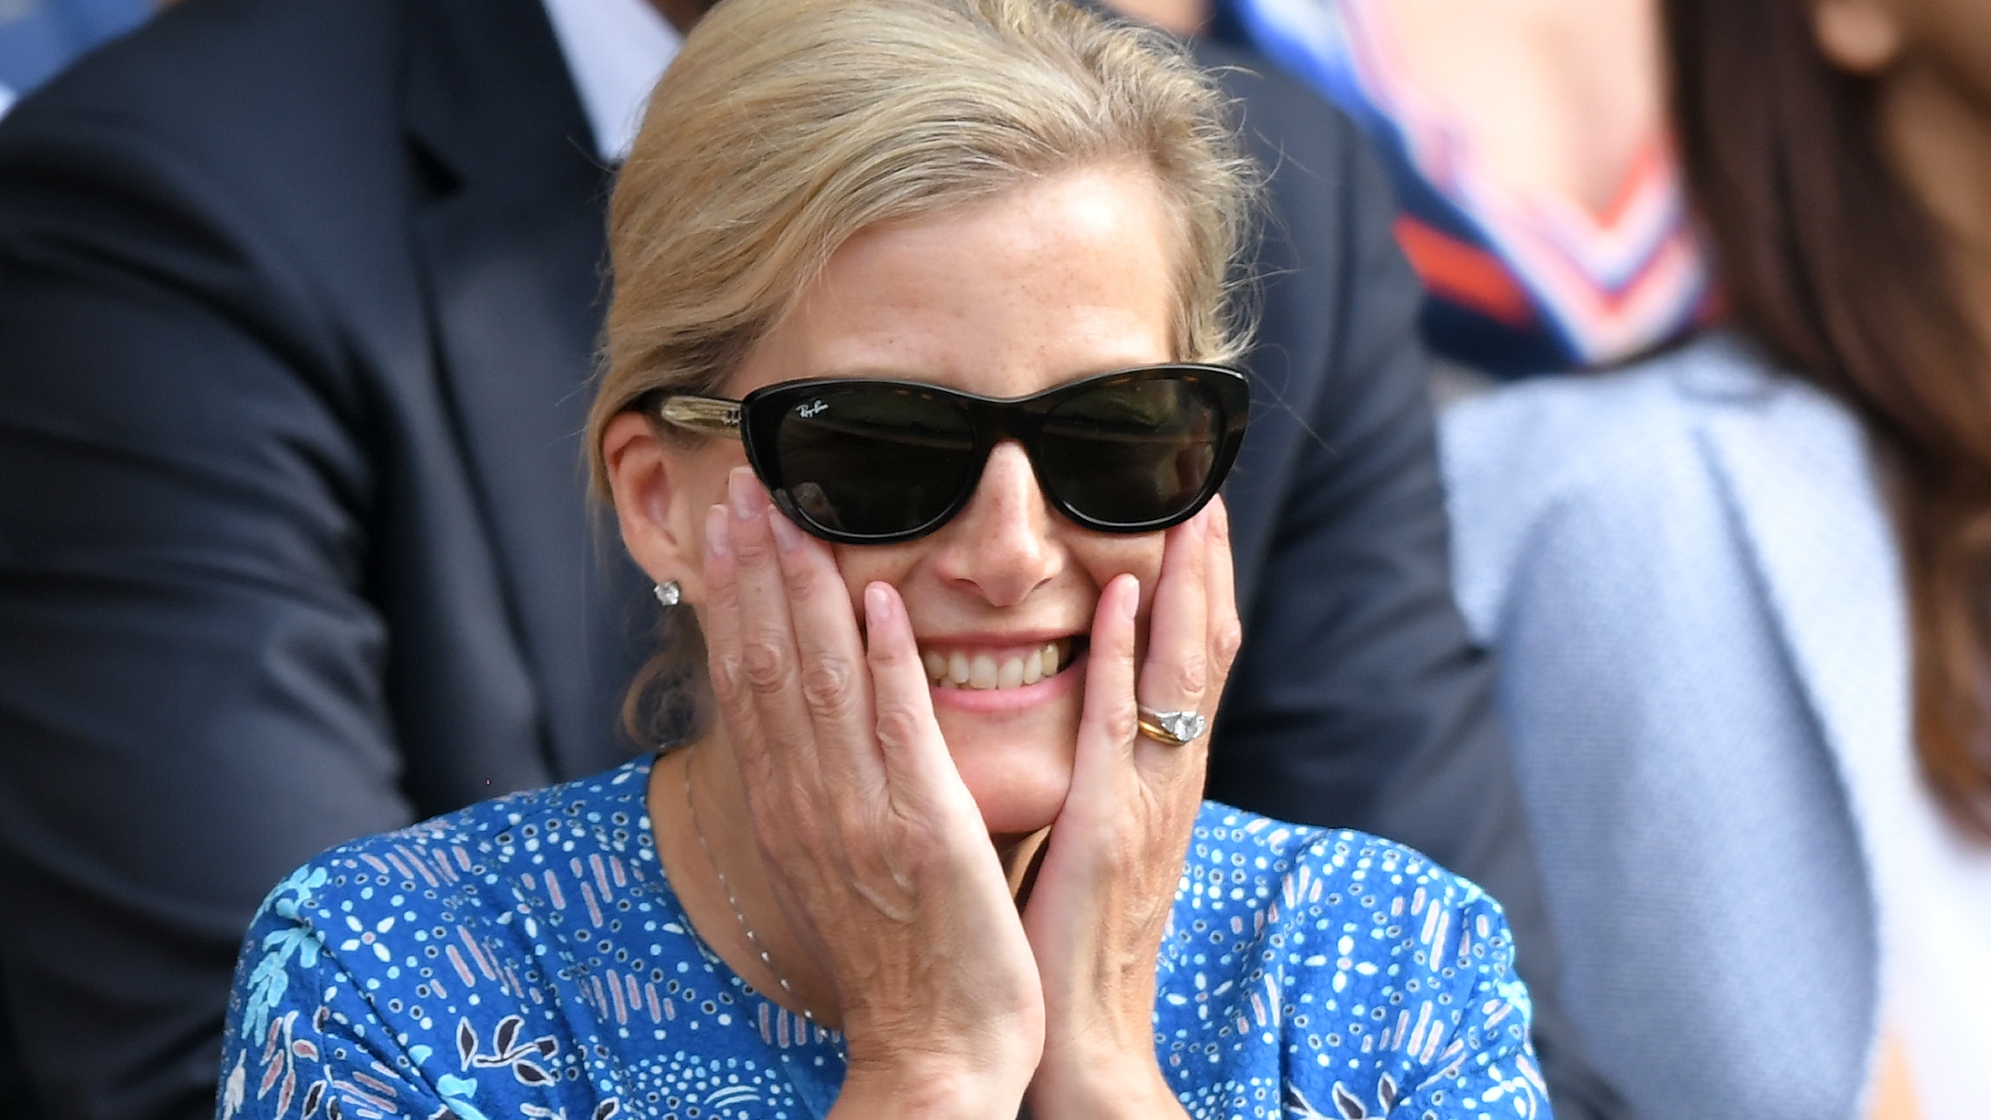 What made Duchess Sophie's Wimbledon clutch bag unexpectedly sassy? - Quora